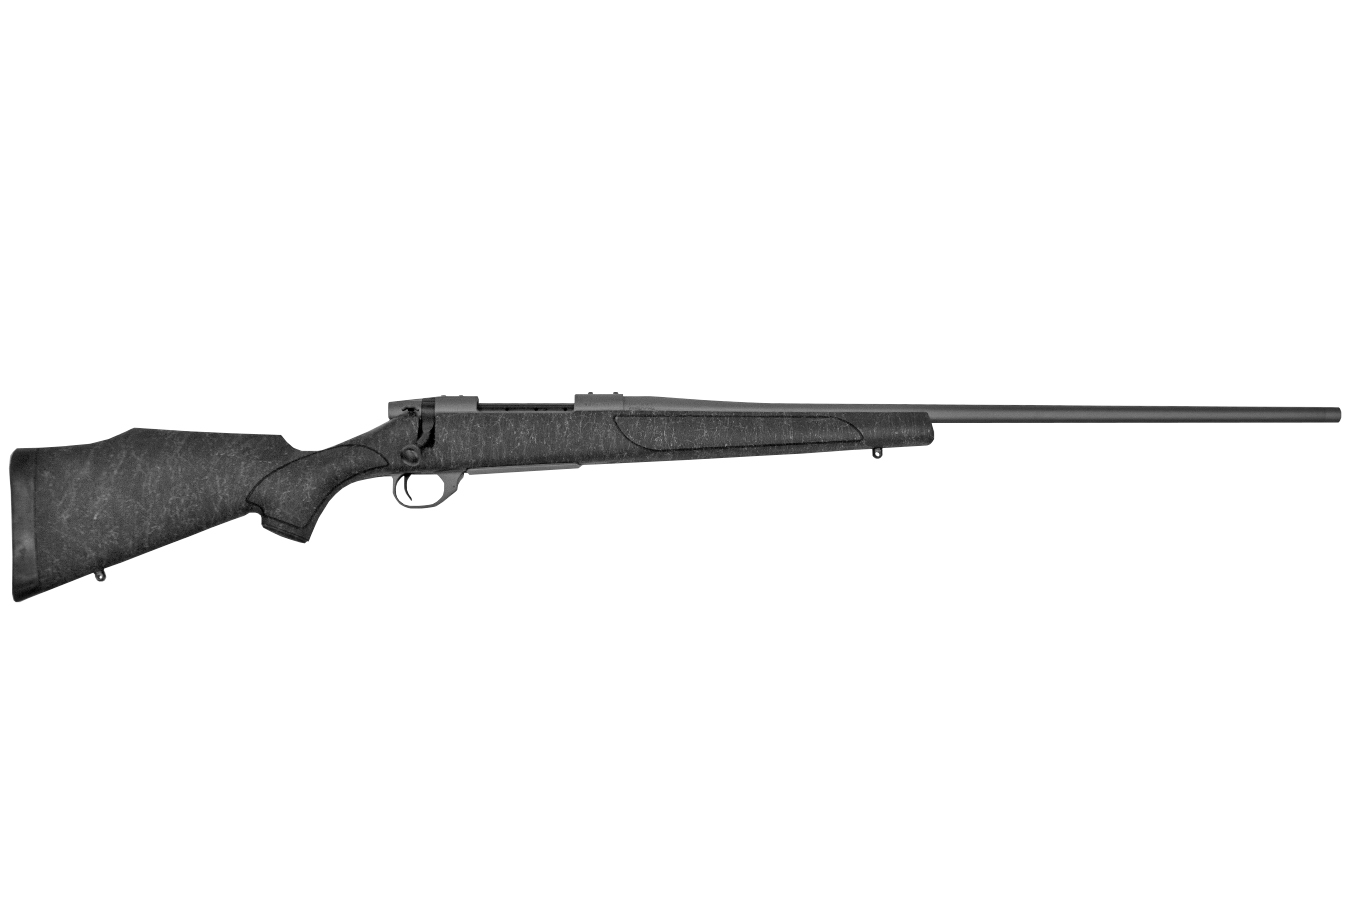 Weatherby Vanguard 7mm Rem Mag Bolt Action Rifle With Tungsten Cerakote Finish For Sale Online 